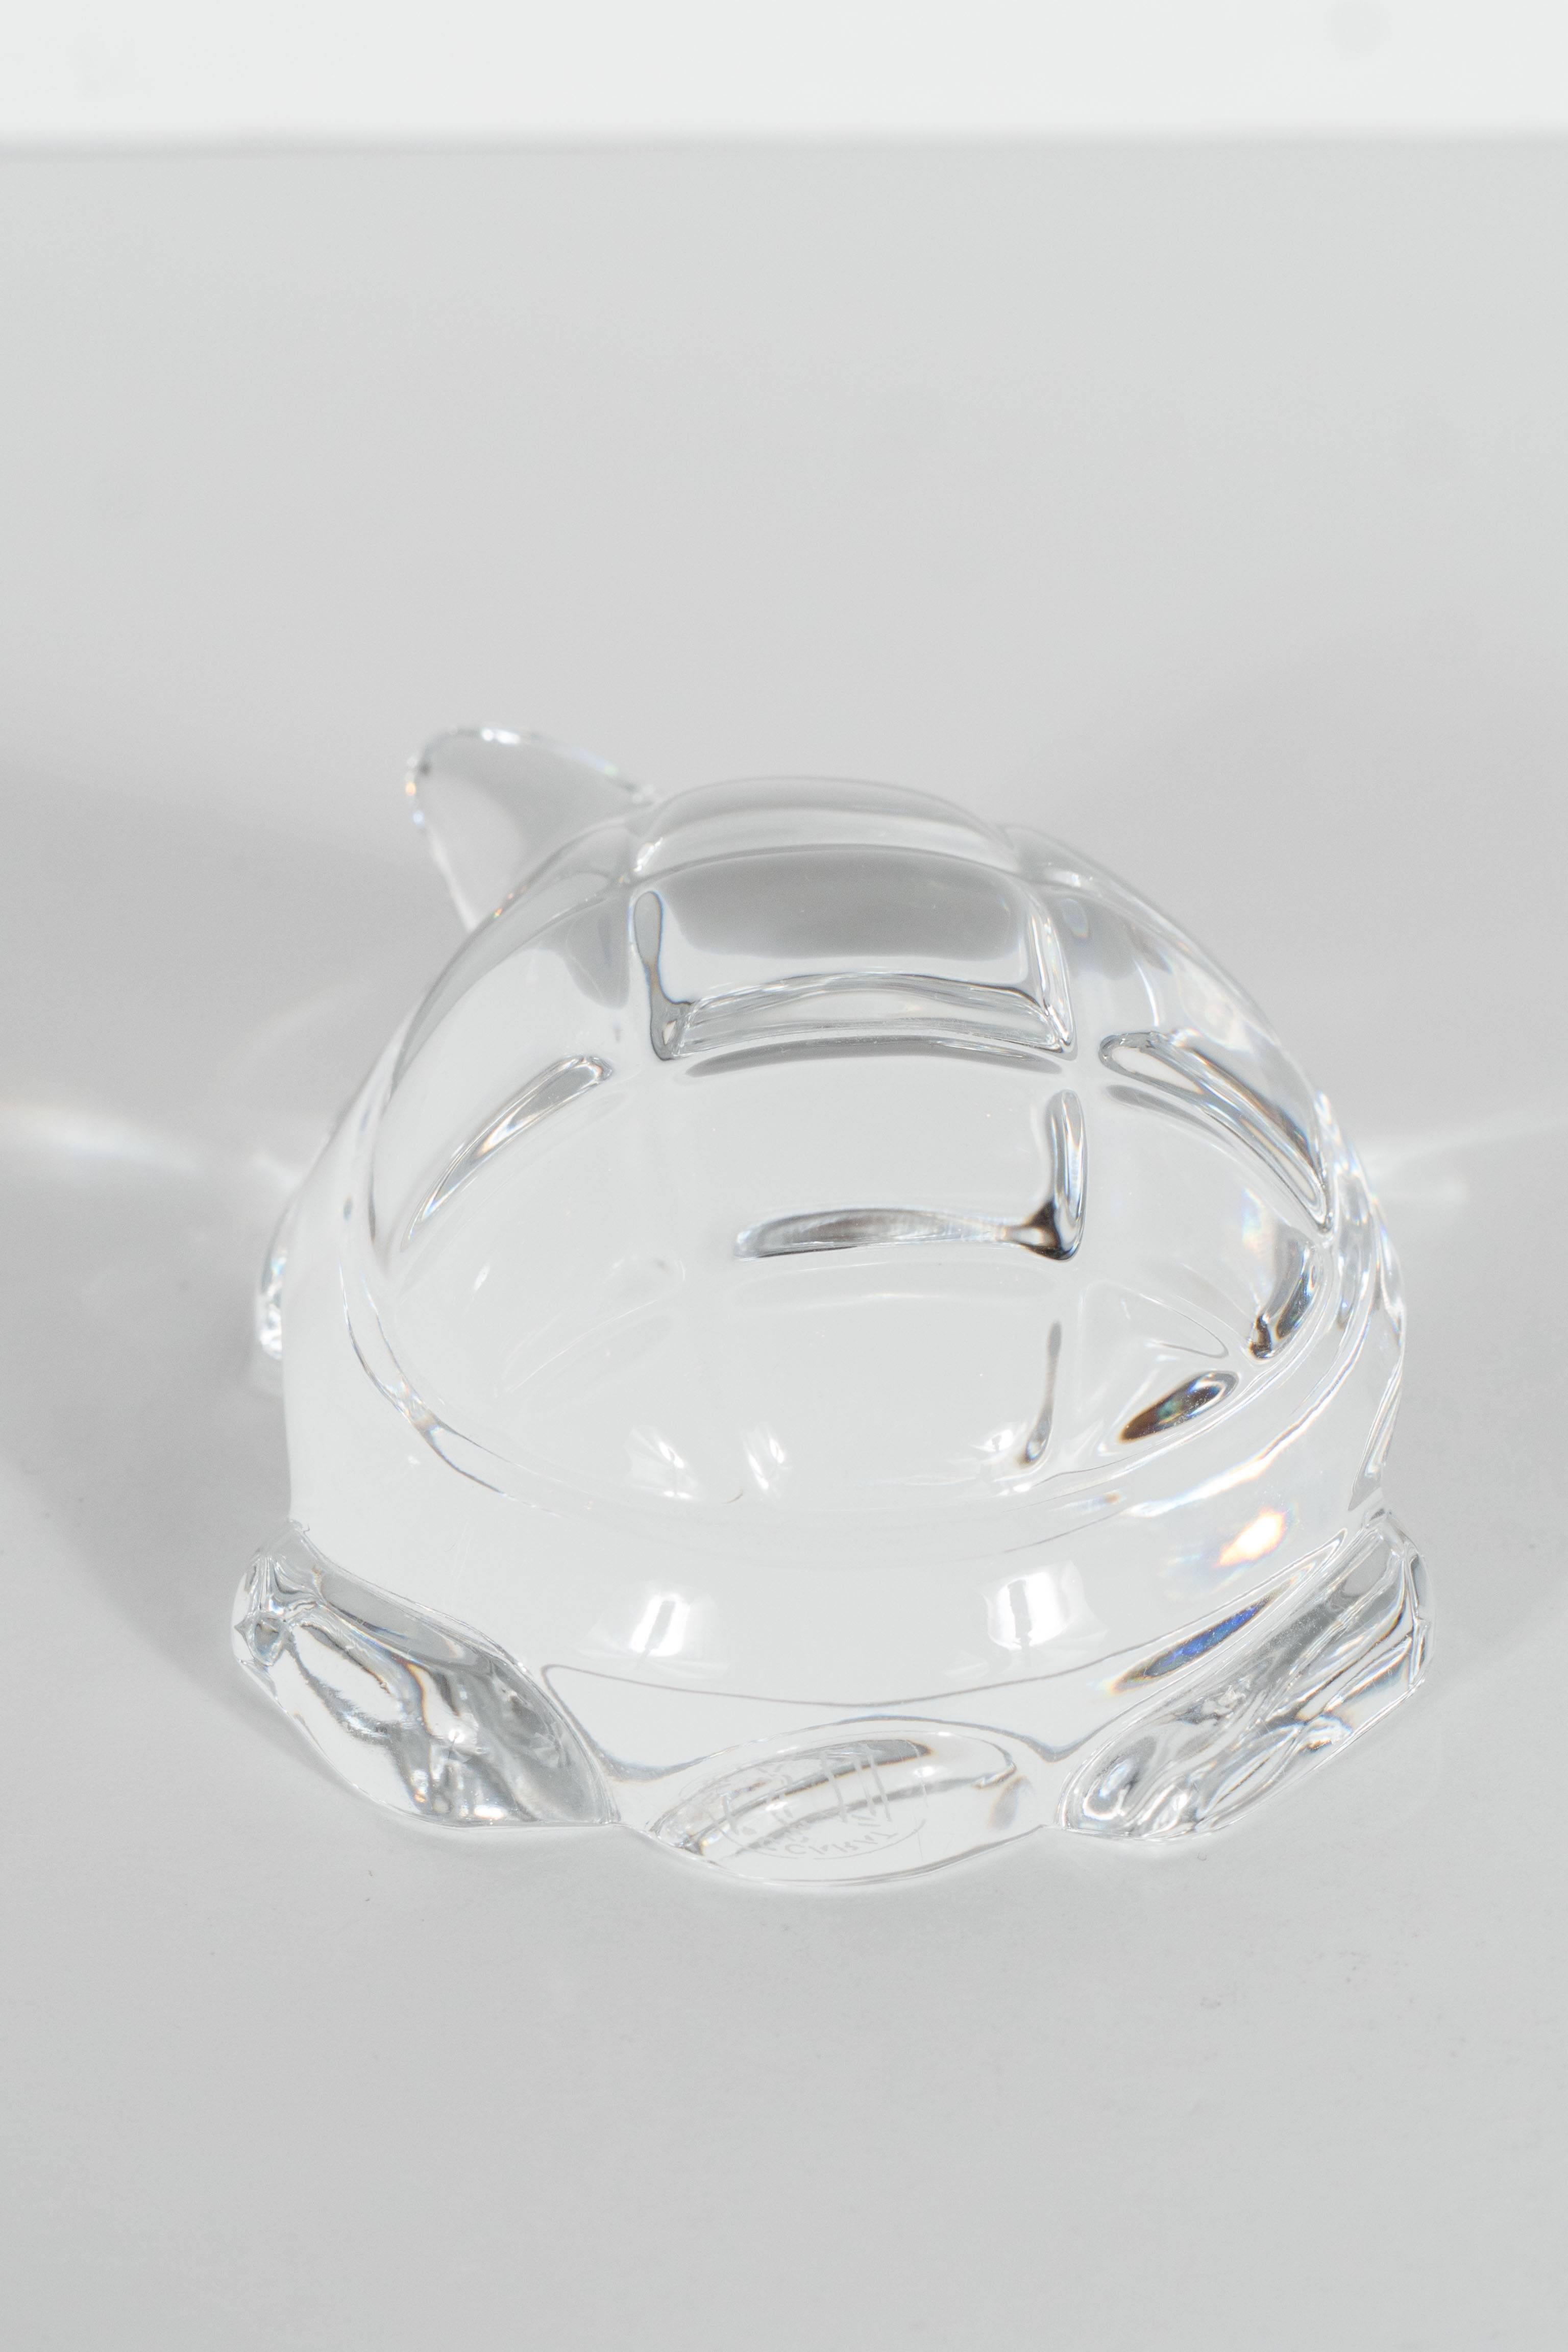 This beautiful retired Baccarat lead crystal figurine/paperweight has been made in the form of a stylized box turtle. The piece has a wonderful chunky appearance with four thick rectangular feet and a rounded shell featuring well defined rectangular